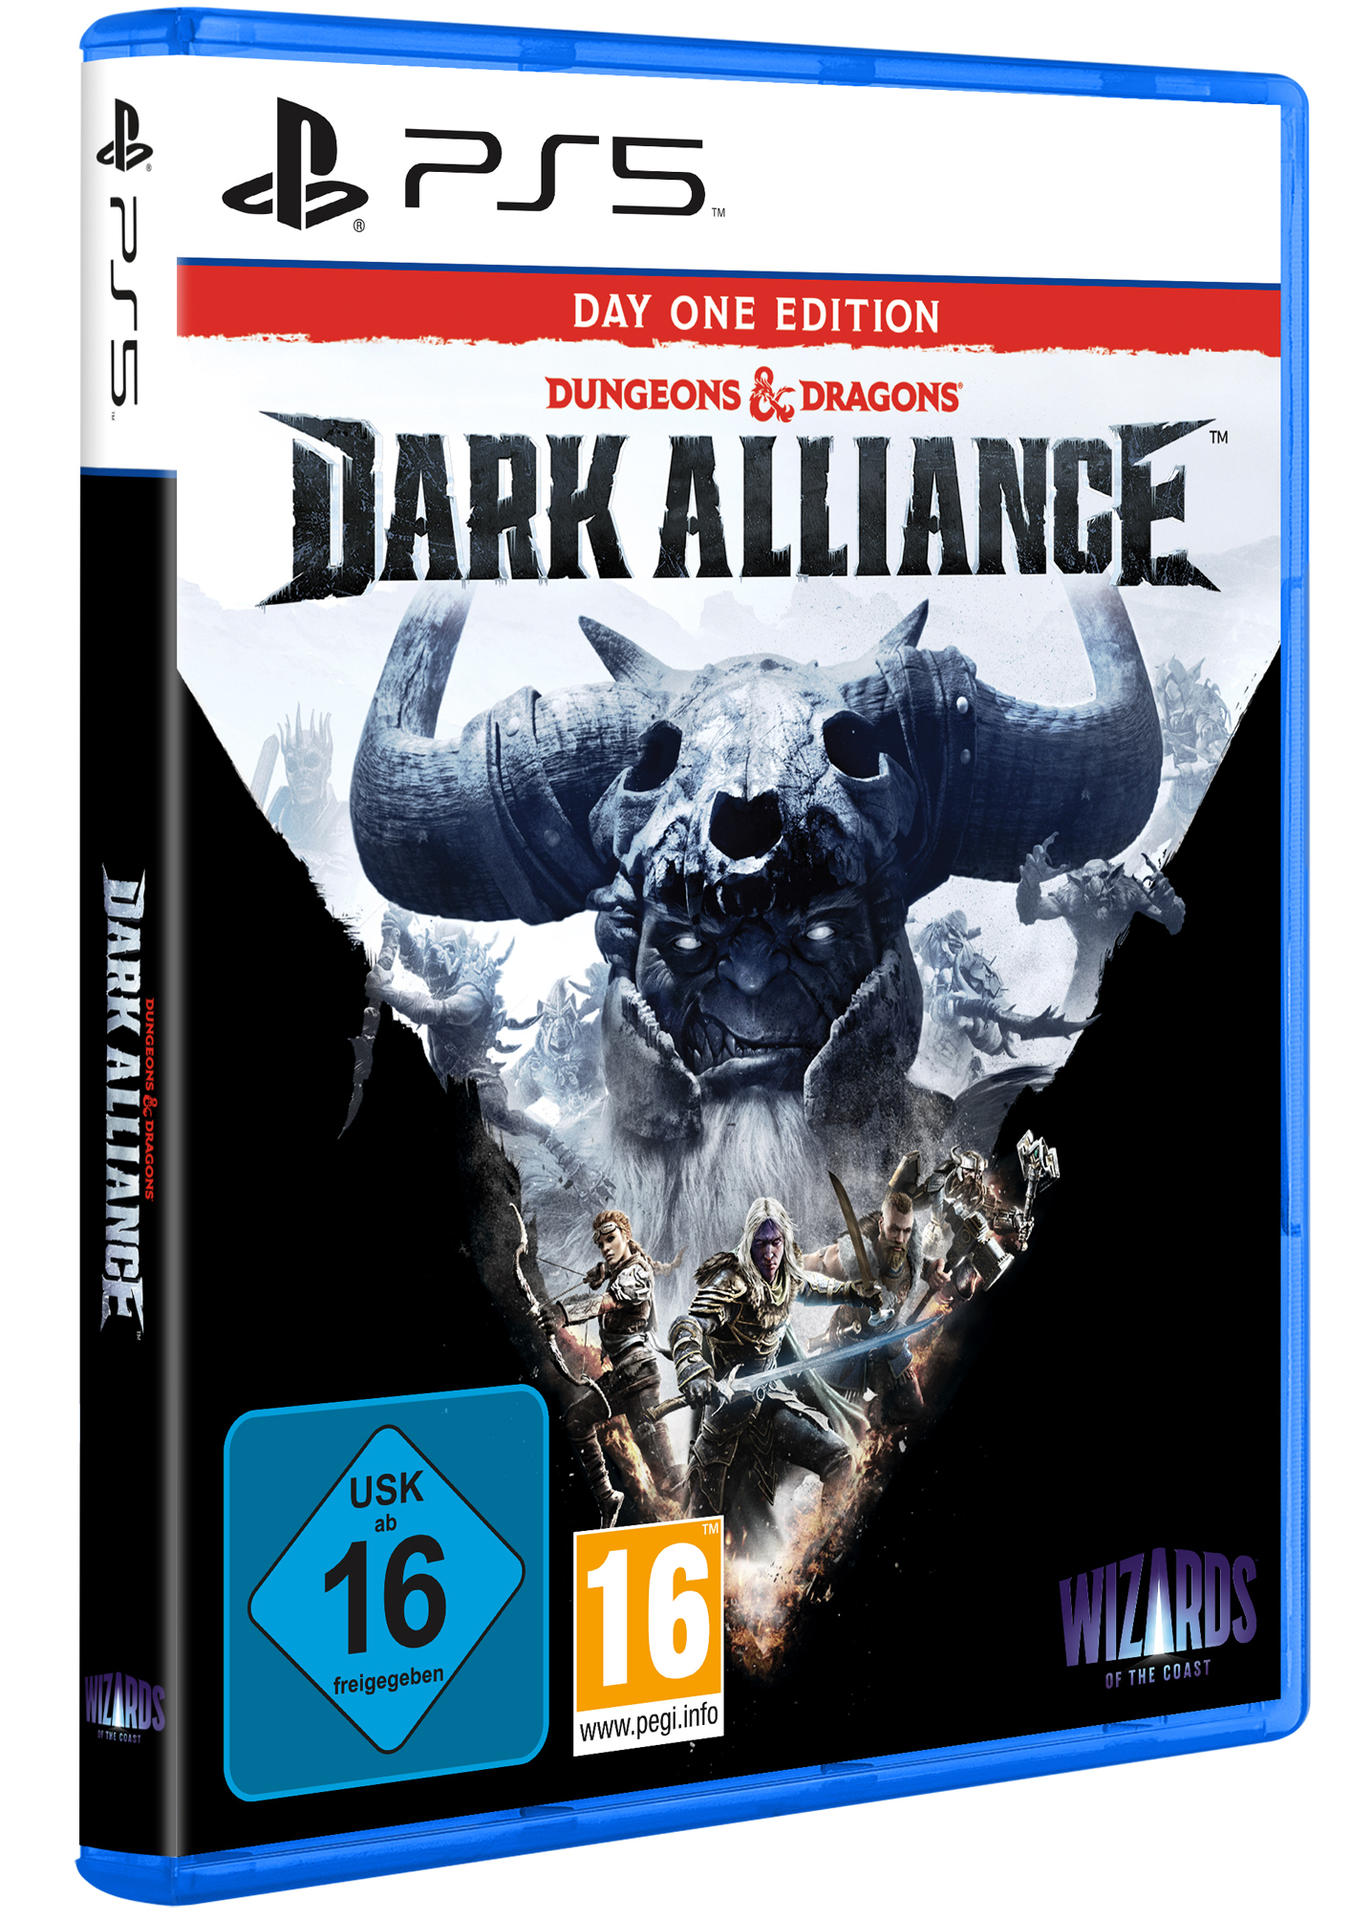 PS5 DUNGEONS & DRAGONS DAY ALLIANCE DARK - ED. [PlayStation 5] ONE